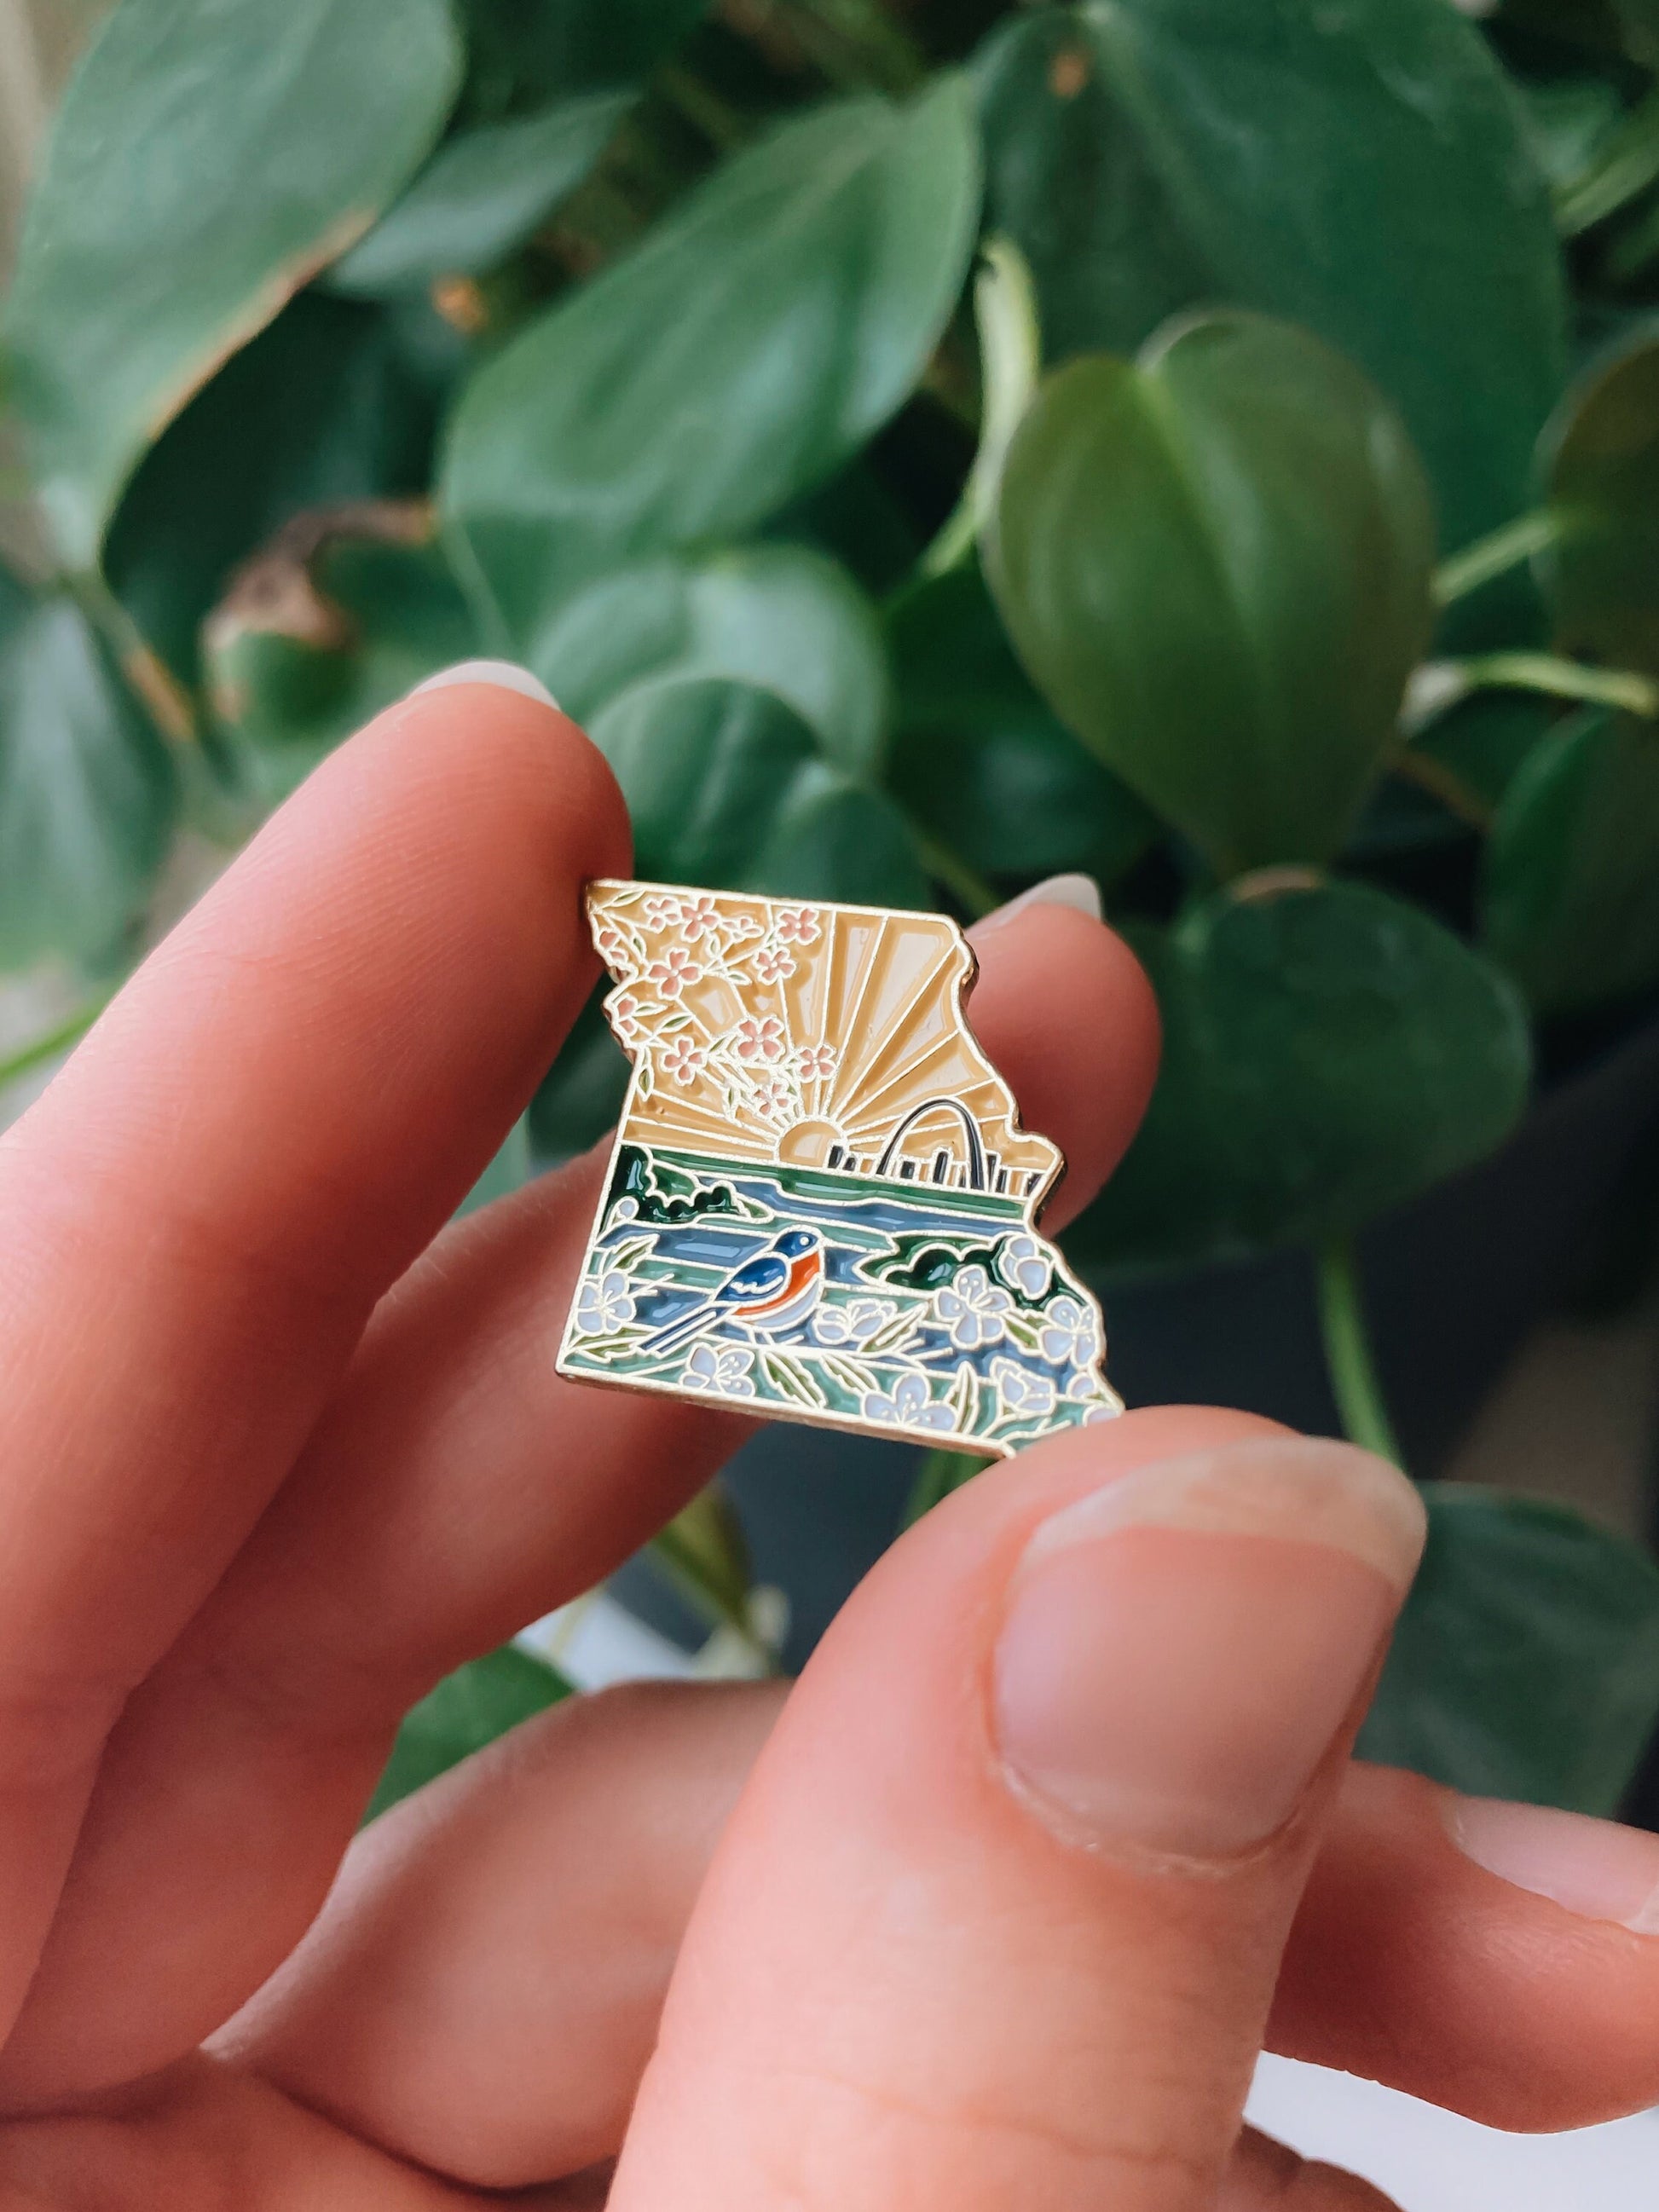 Missouri Enamel Pin | Gold Soft Enamel Pin | Illustrated United States Pin | Butterfly Clasp | 1.25"